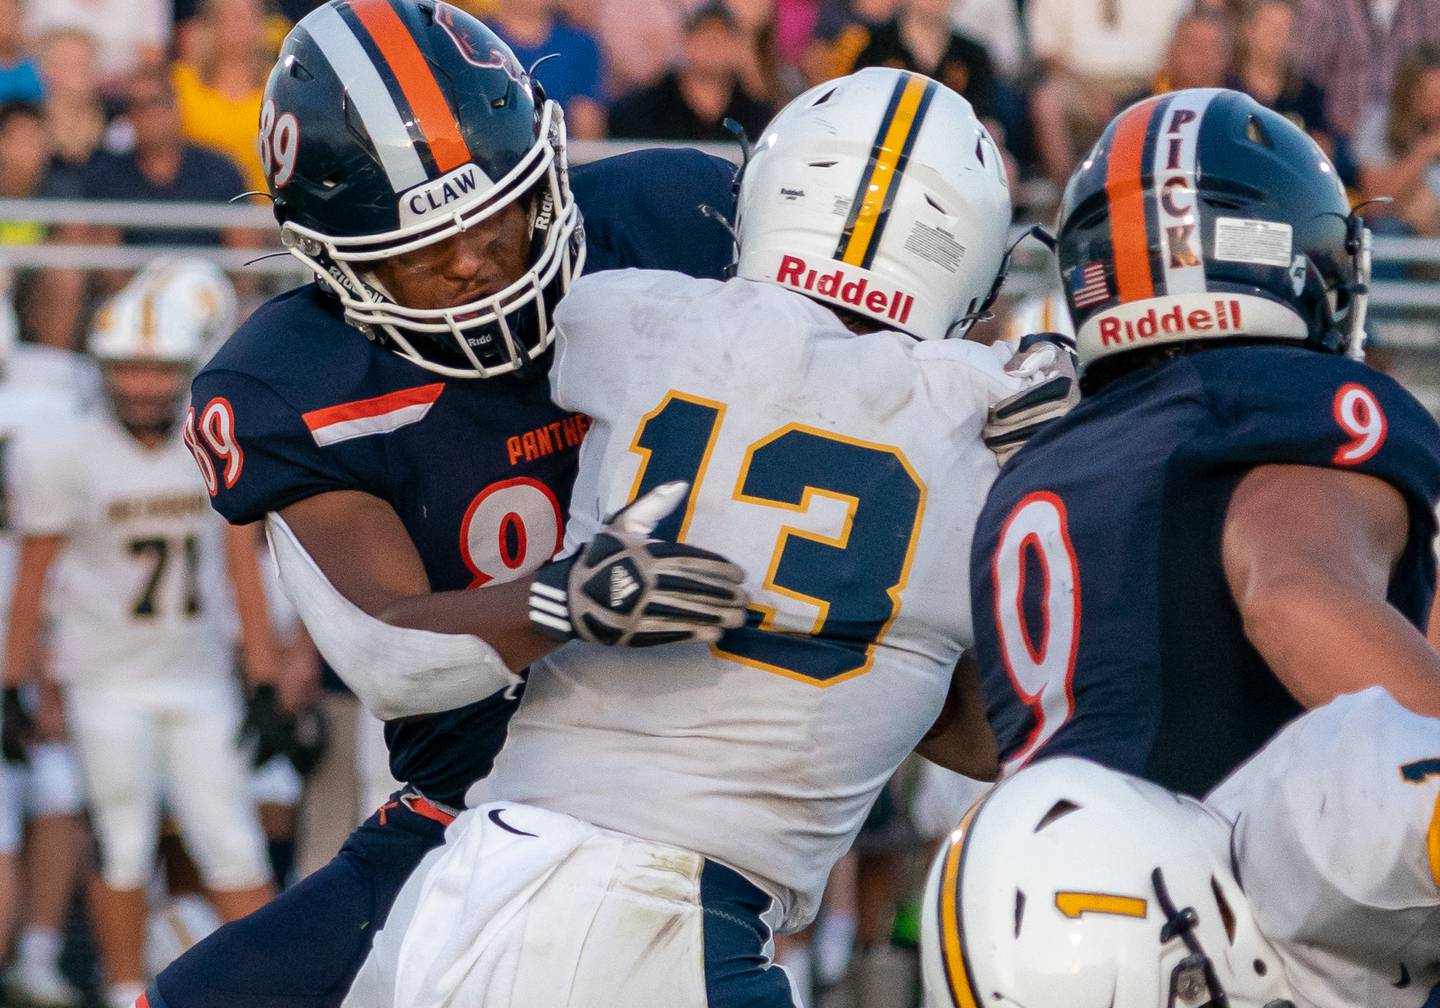 Oswego’s Taiden Thomas (89) hits Neuqua Valley's Mark Mennecke (13) in the backfield for a loss during a football game at Oswego High School on Friday, Aug 26, 2022.